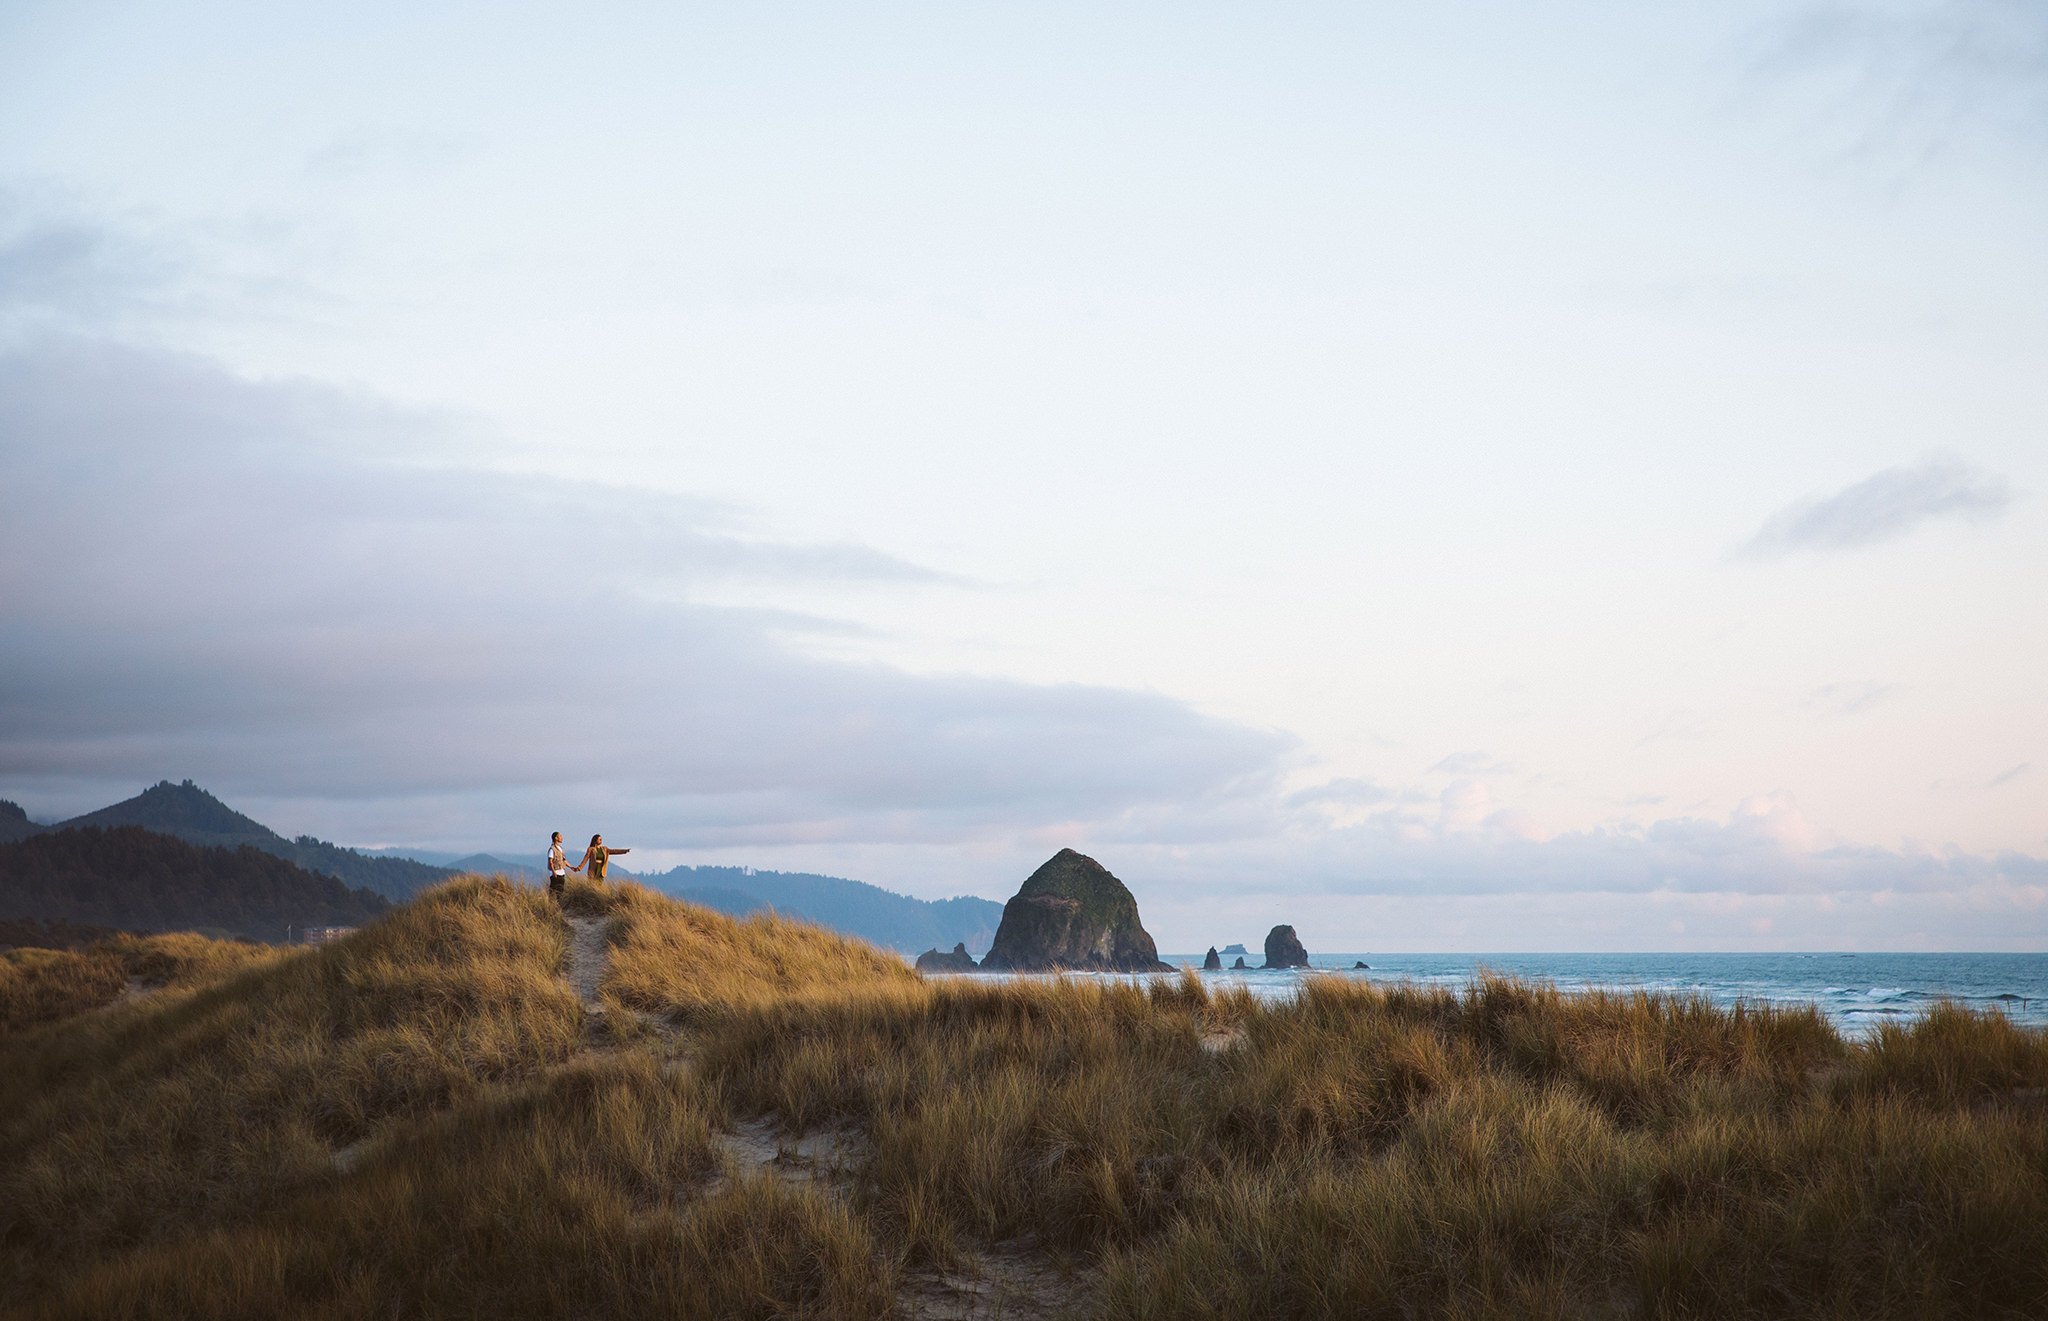 An engagement photo in the sand dunes at Cannon Beach in Oregon